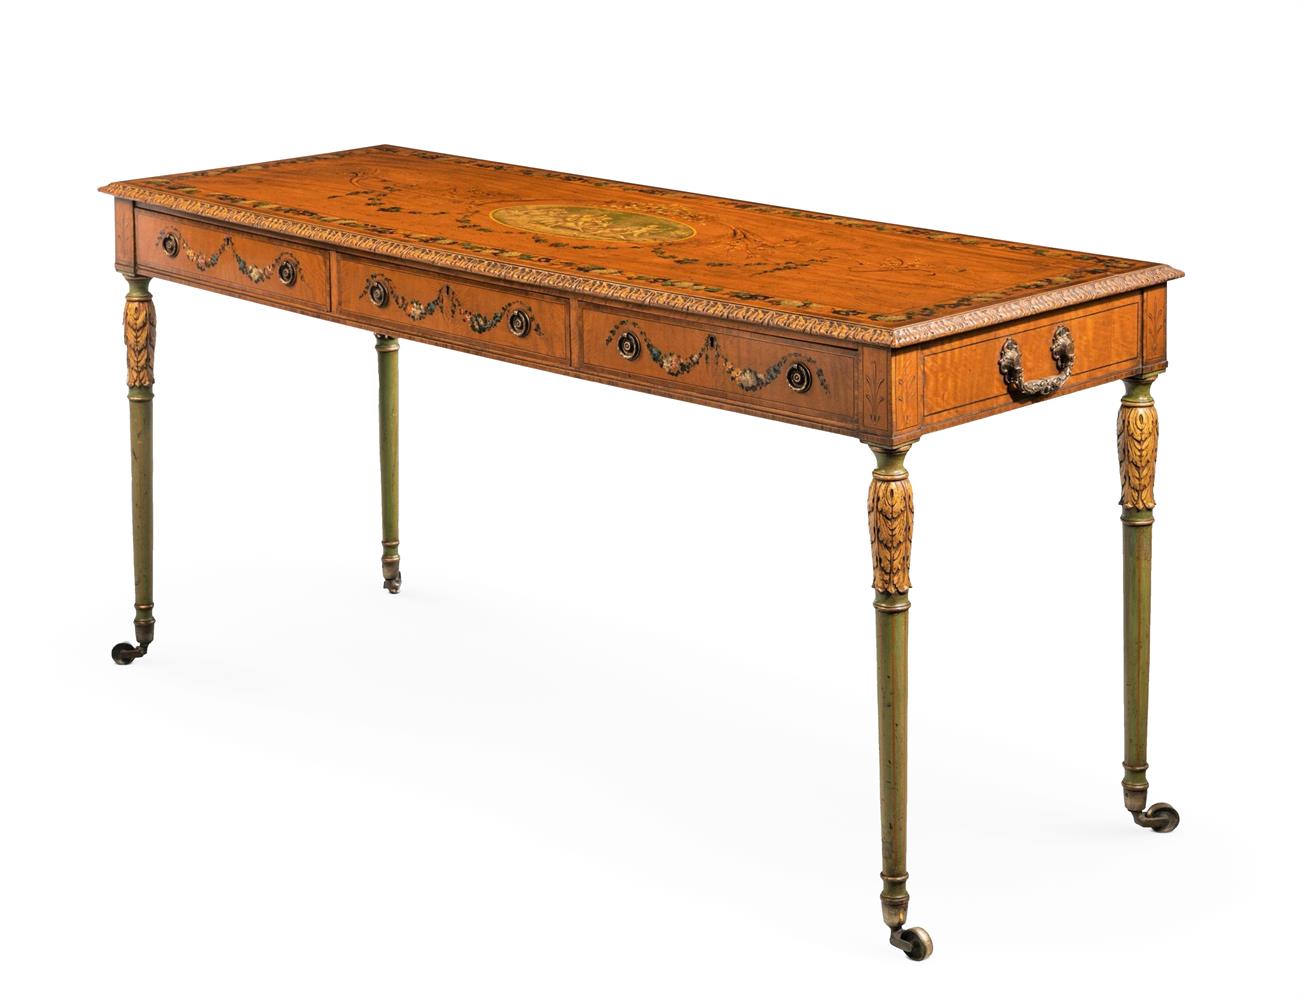 Y AN UNUSUAL SATINWOOD AND PAINTED CENTRE OR SIDE TABLE, LATE 19TH/ 20TH CENTURY